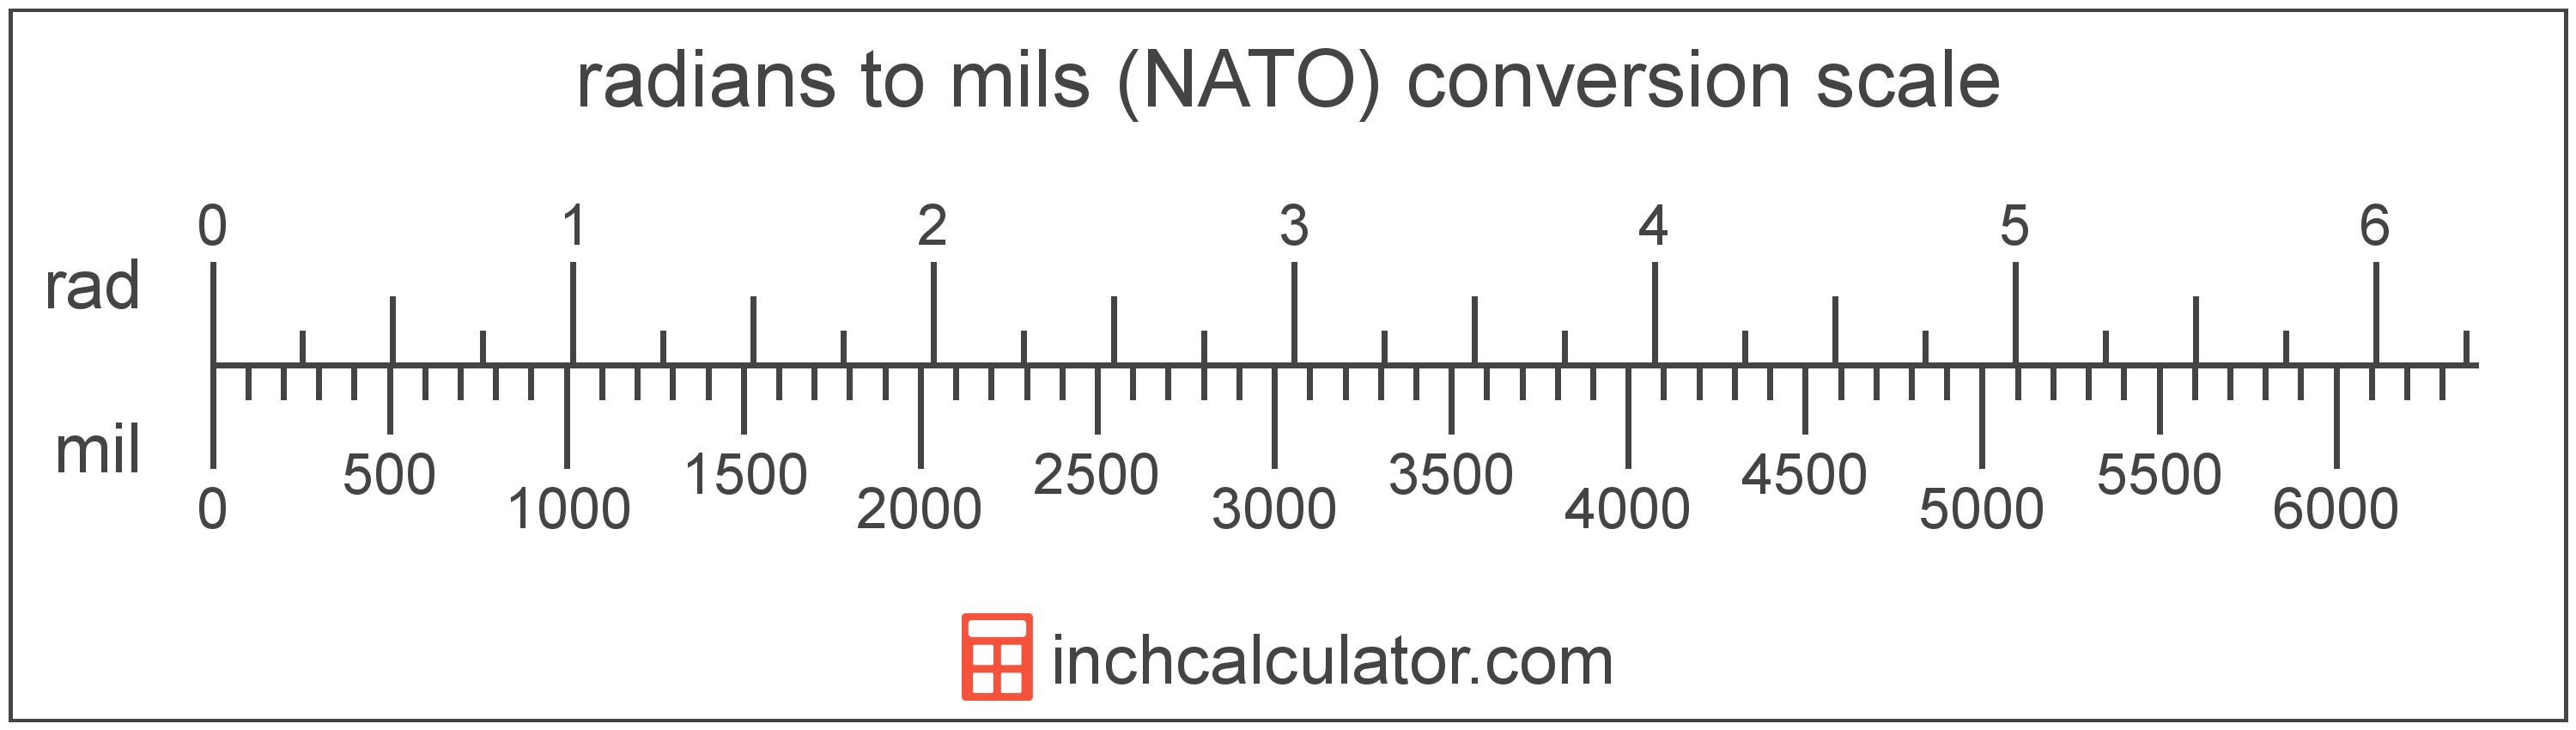 conversion scale showing radians and equivalent mils (NATO) angle values